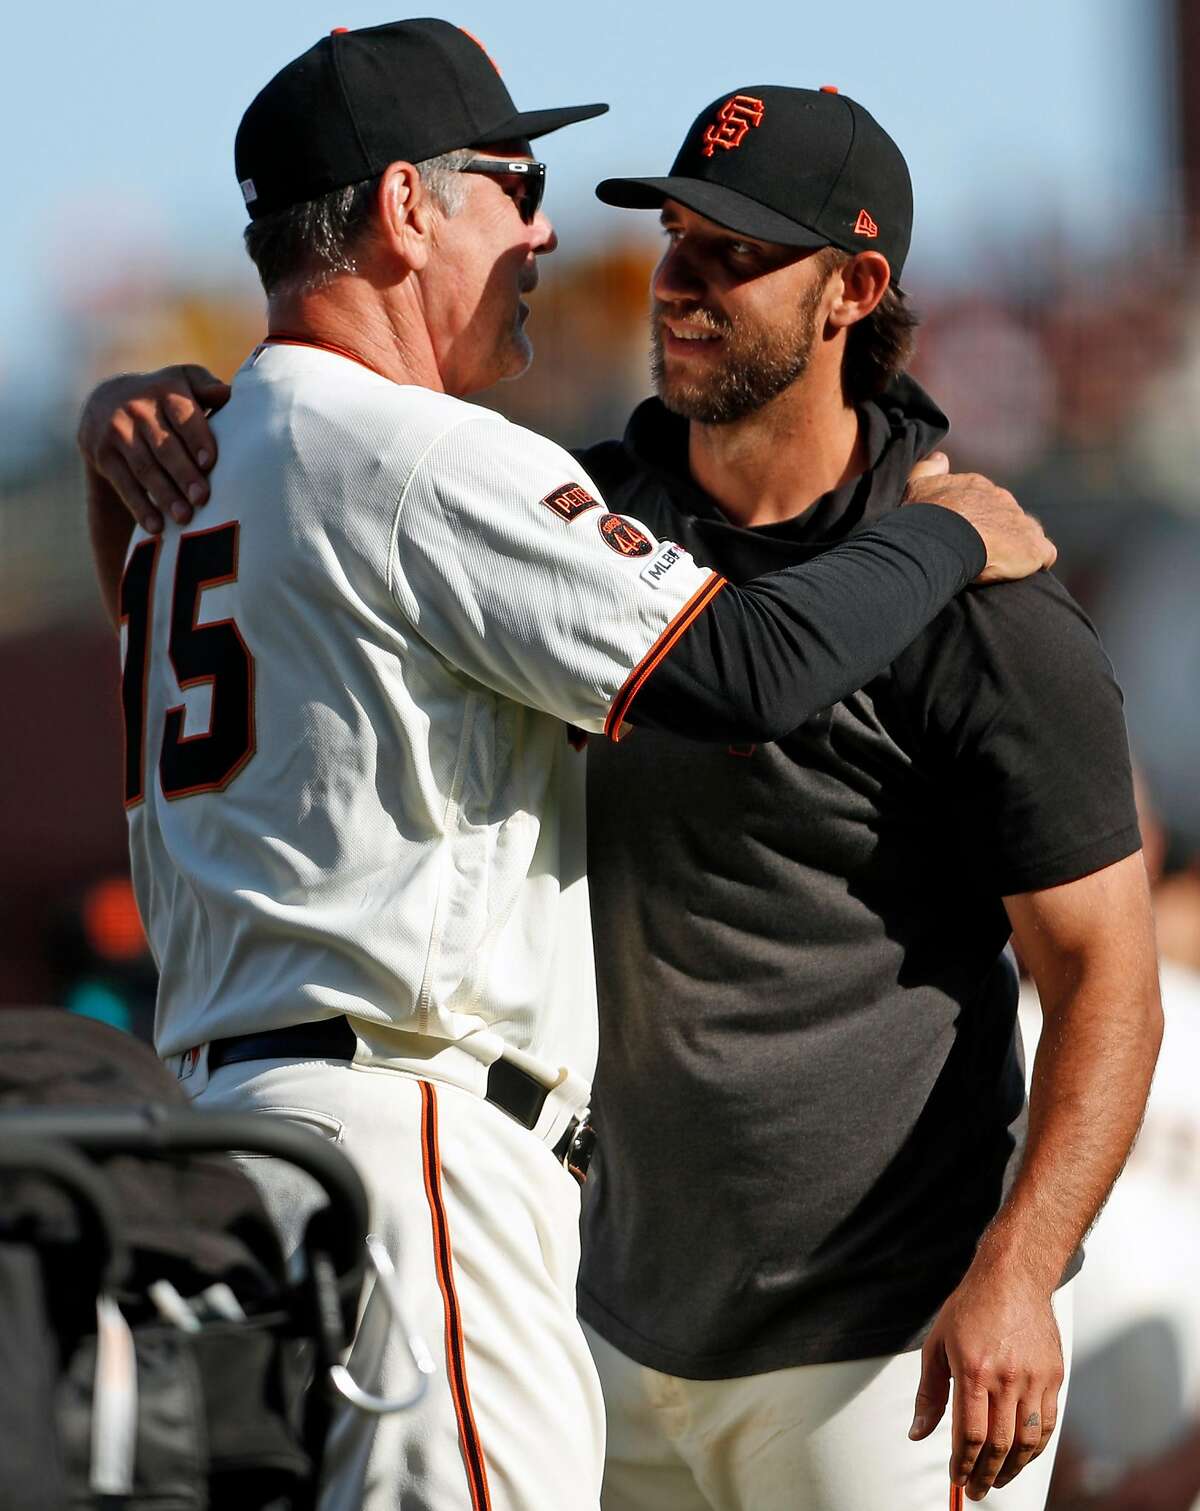 San Francisco Giants' Madison Bumgarner embraces Bruce Bochy as Bochy is honored after final game as manager of Giants at Oracle Park in San Francisco, Calif., on Sunday, September 29, 2019.